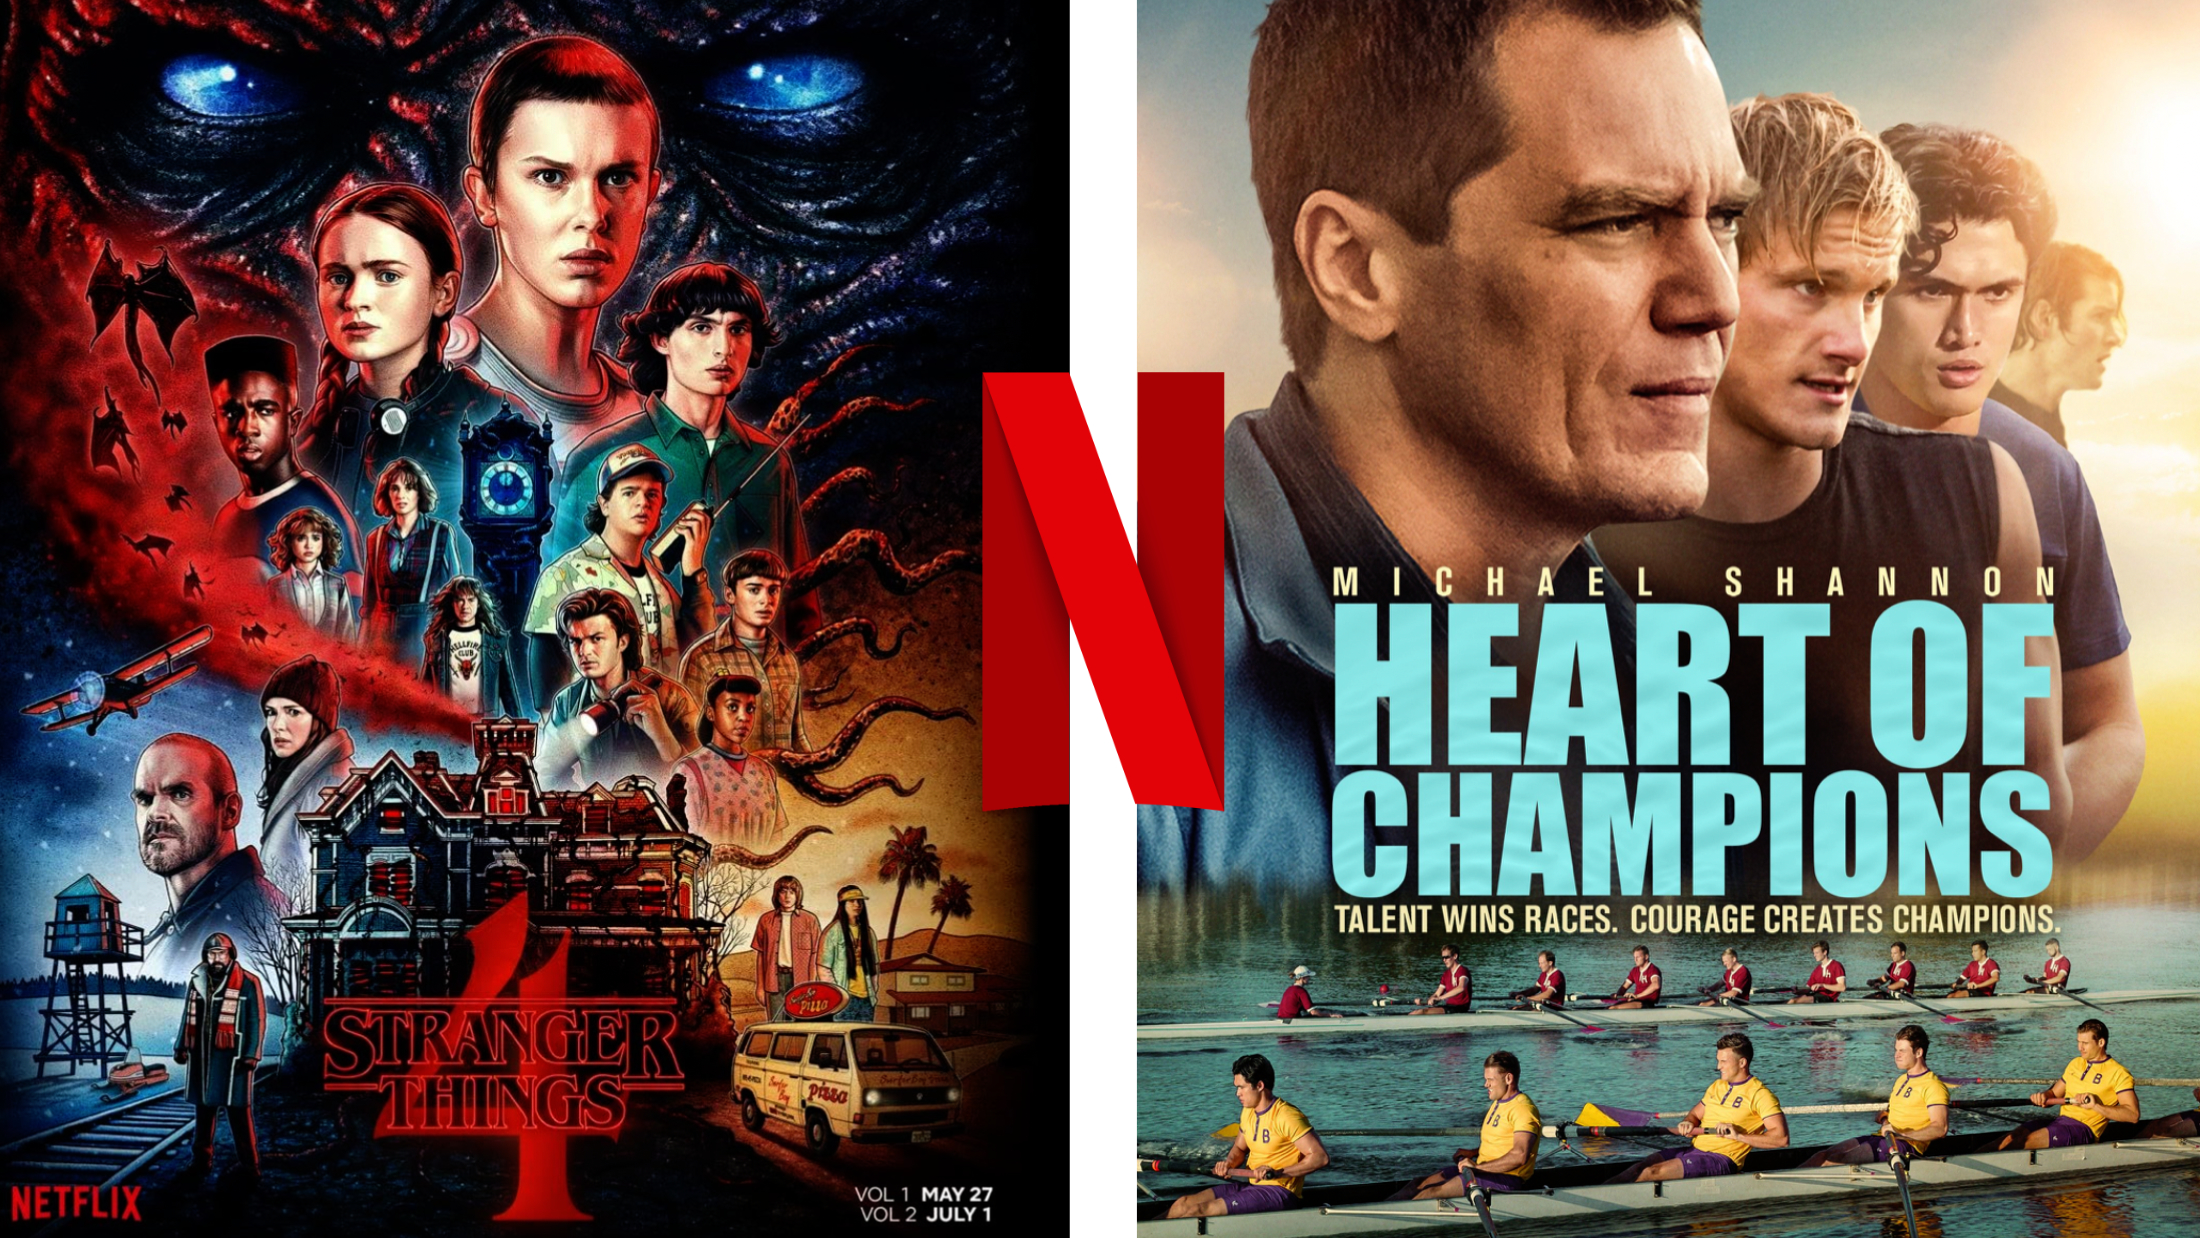 New Netflix Canada Releases This Week [27 mai]

